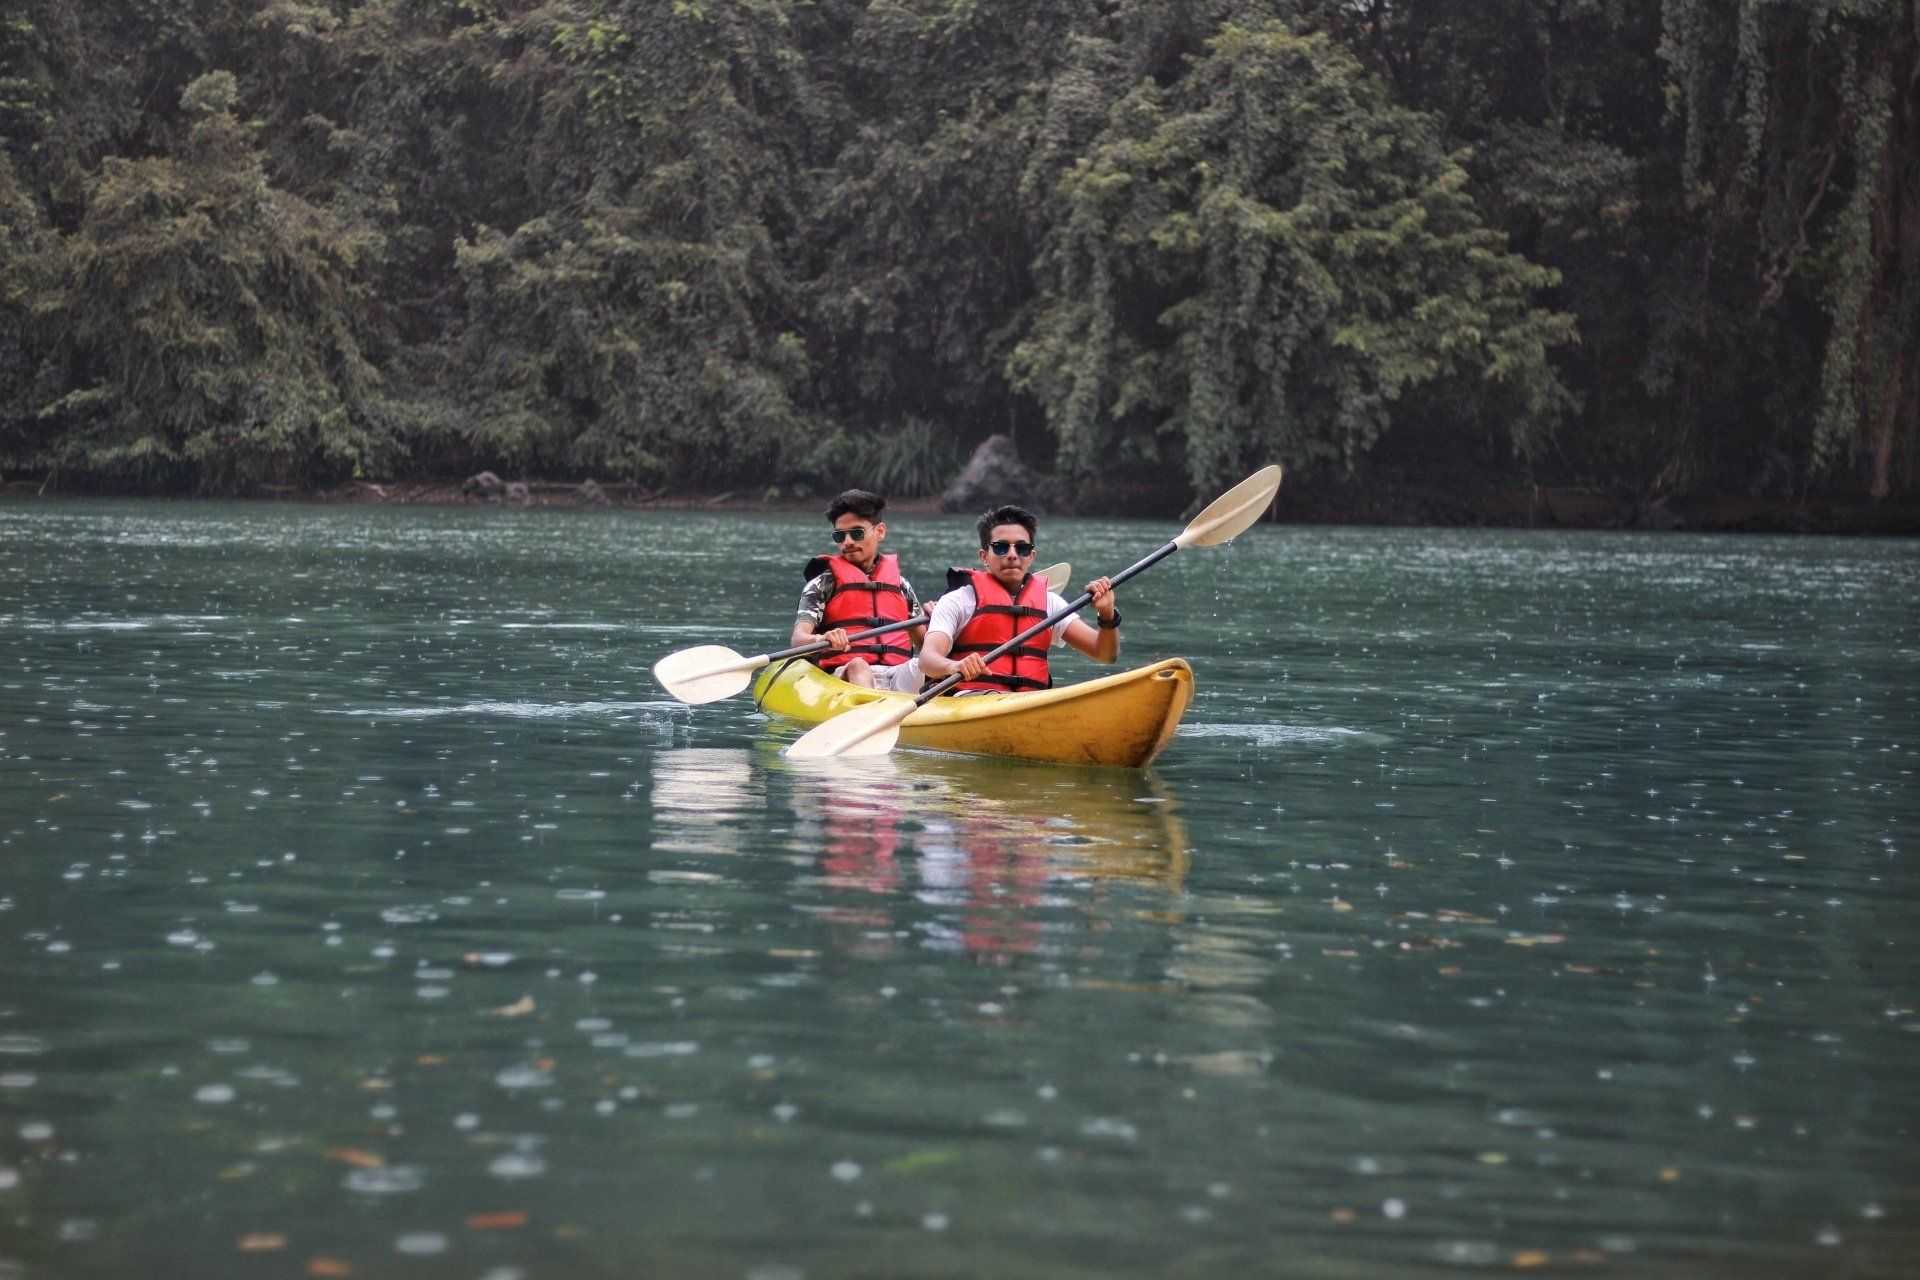 Two people in kayaks on a lake with trees in the background